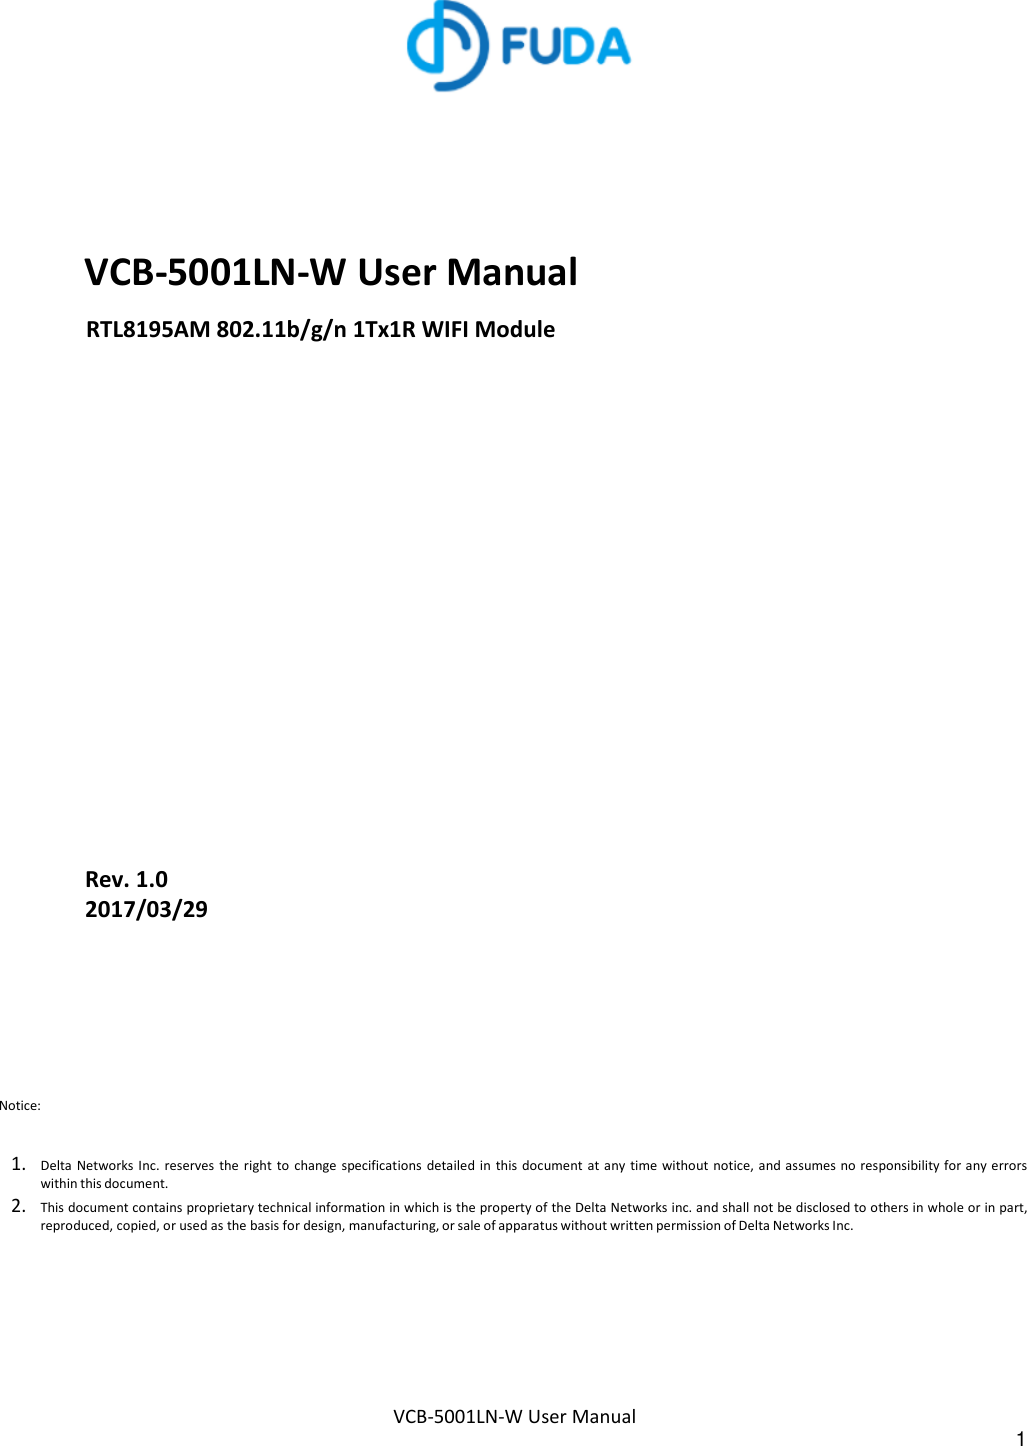 VCB-5001LN-W User Manual 1        VCB-5001LN-W User Manual RTL8195AM 802.11b/g/n 1Tx1R WIFI Module                  Rev. 1.0 2017/03/29 Notice:   1. Delta  Networks Inc.  reserves  the right  to  change specifications  detailed in this document  at any time without notice, and assumes no responsibility for any errors within this document. 2. This document contains proprietary technical information in which is the property of the Delta Networks inc. and shall not be disclosed to others in whole or in part, reproduced, copied, or used as the basis for design, manufacturing, or sale of apparatus without written permission of Delta Networks Inc. 